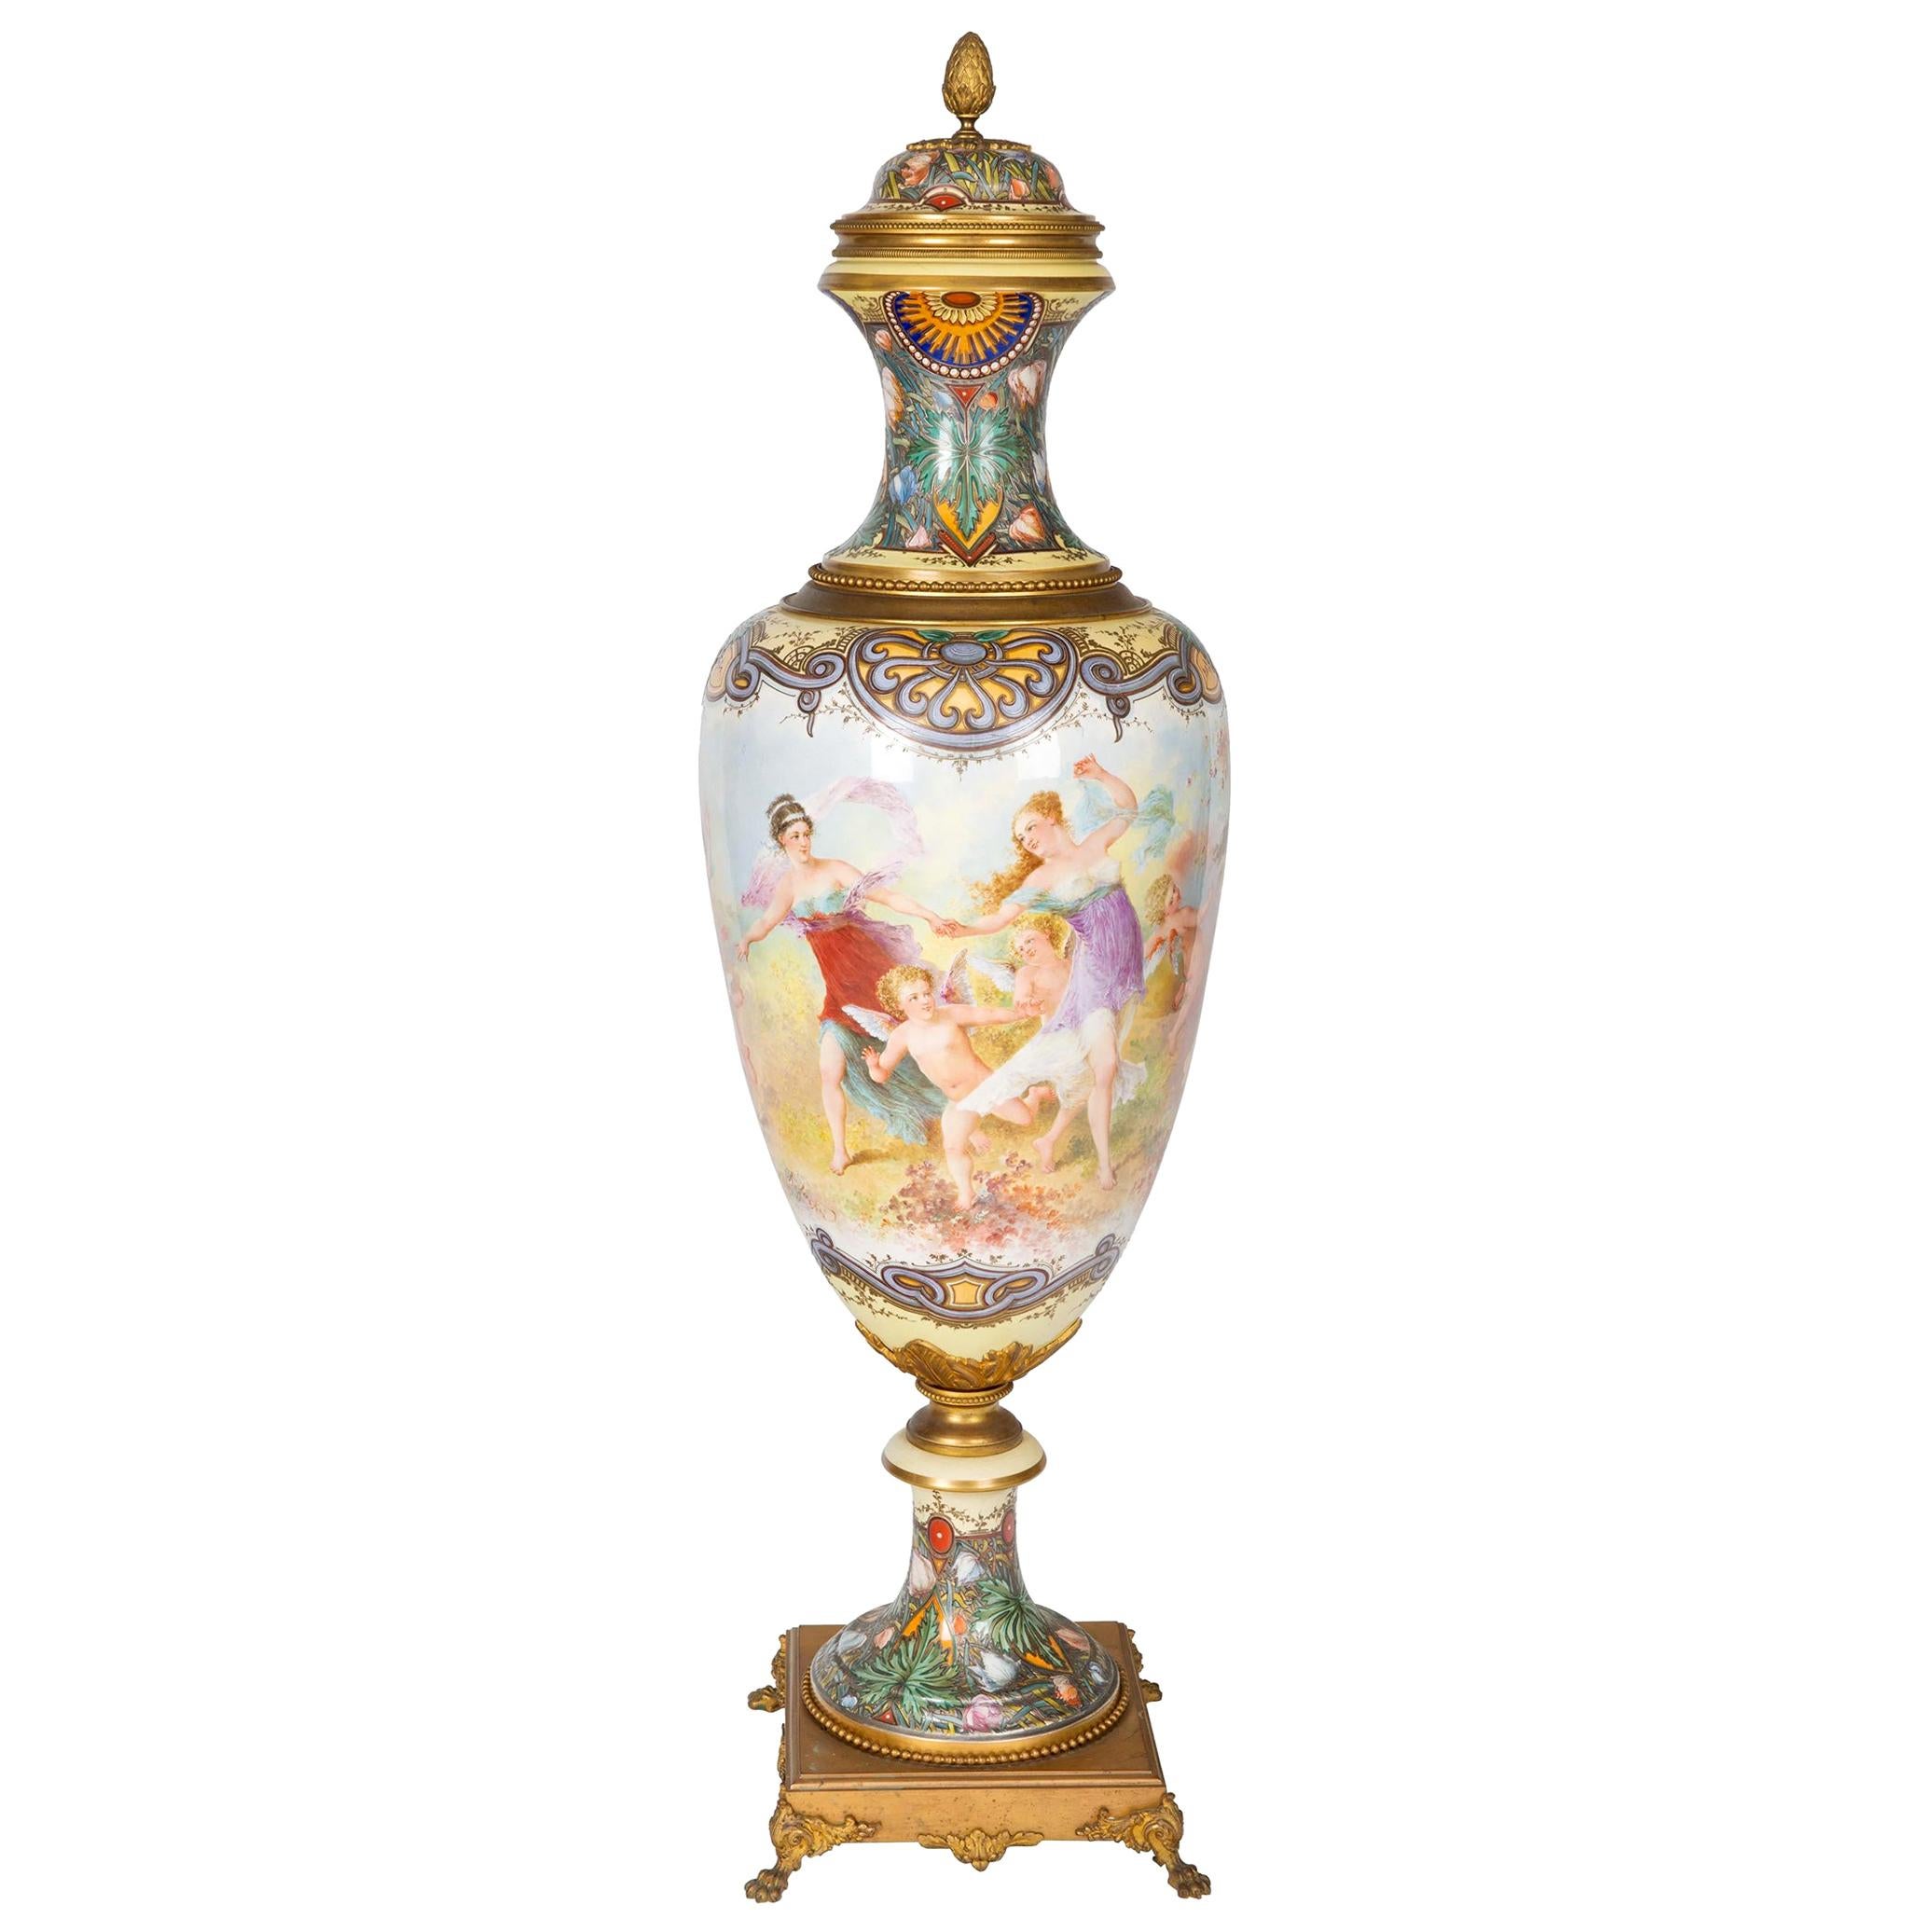 Fine Quality Monumental Gilt Bronze-Mounted Sèvres-Style Vase and Cover